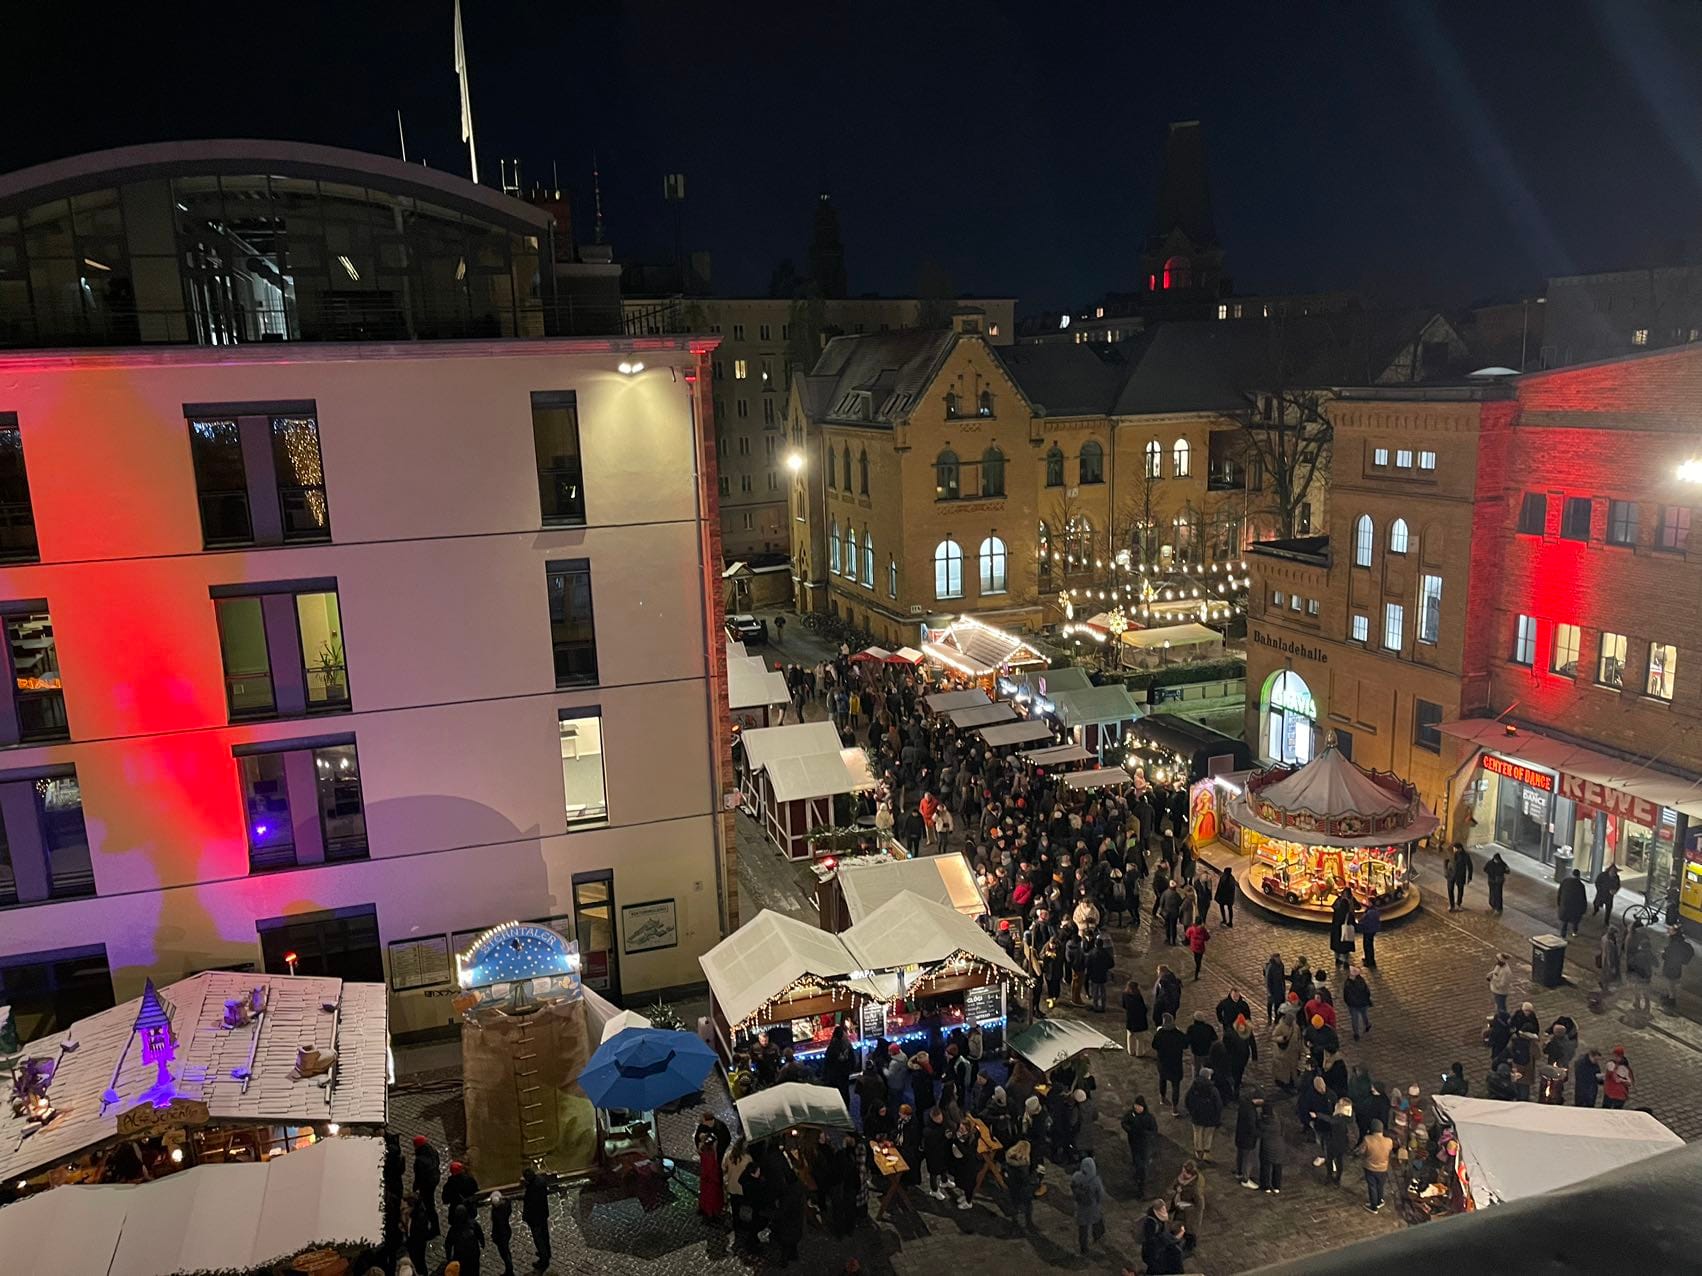 Festive Christmas market at night with bustling crowds, illuminated stands, and historic buildings adorned with lights